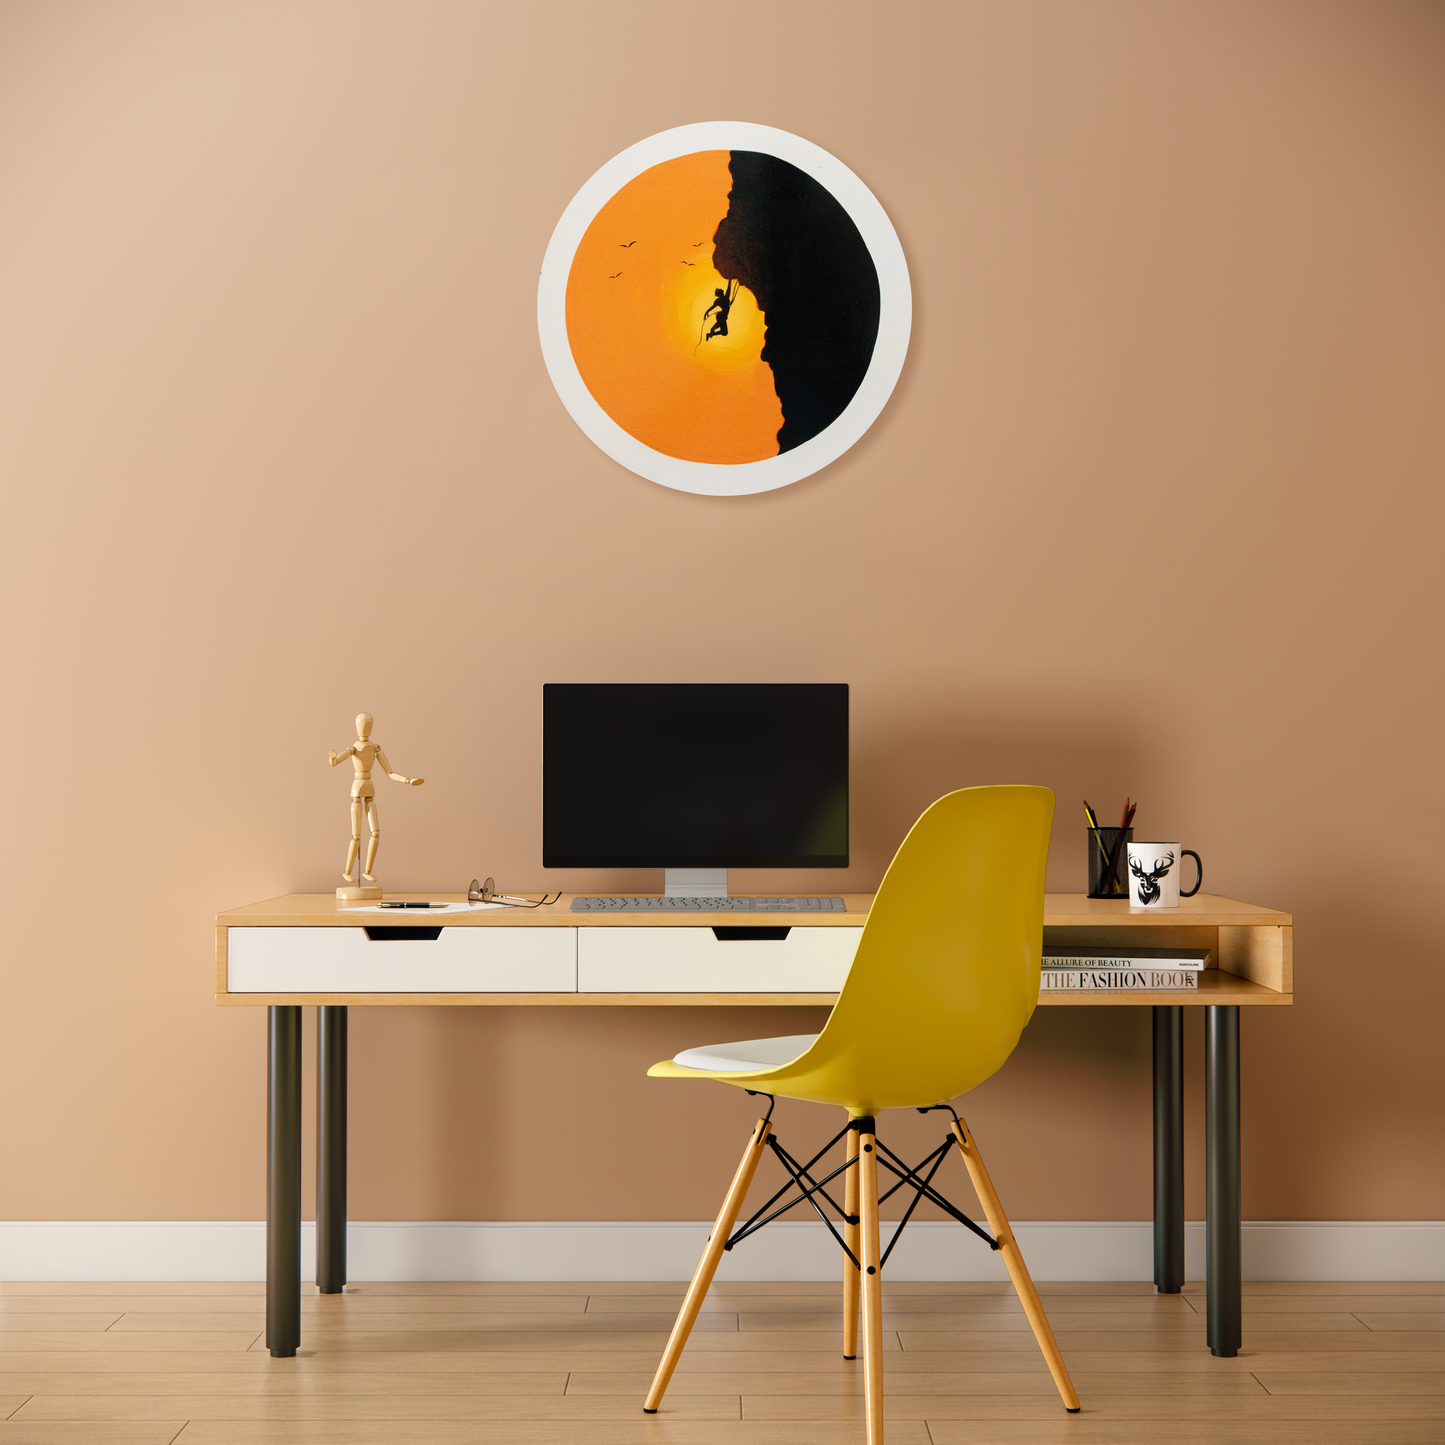 Hand Painted Wall Painting Achievement - Home - Office Decor